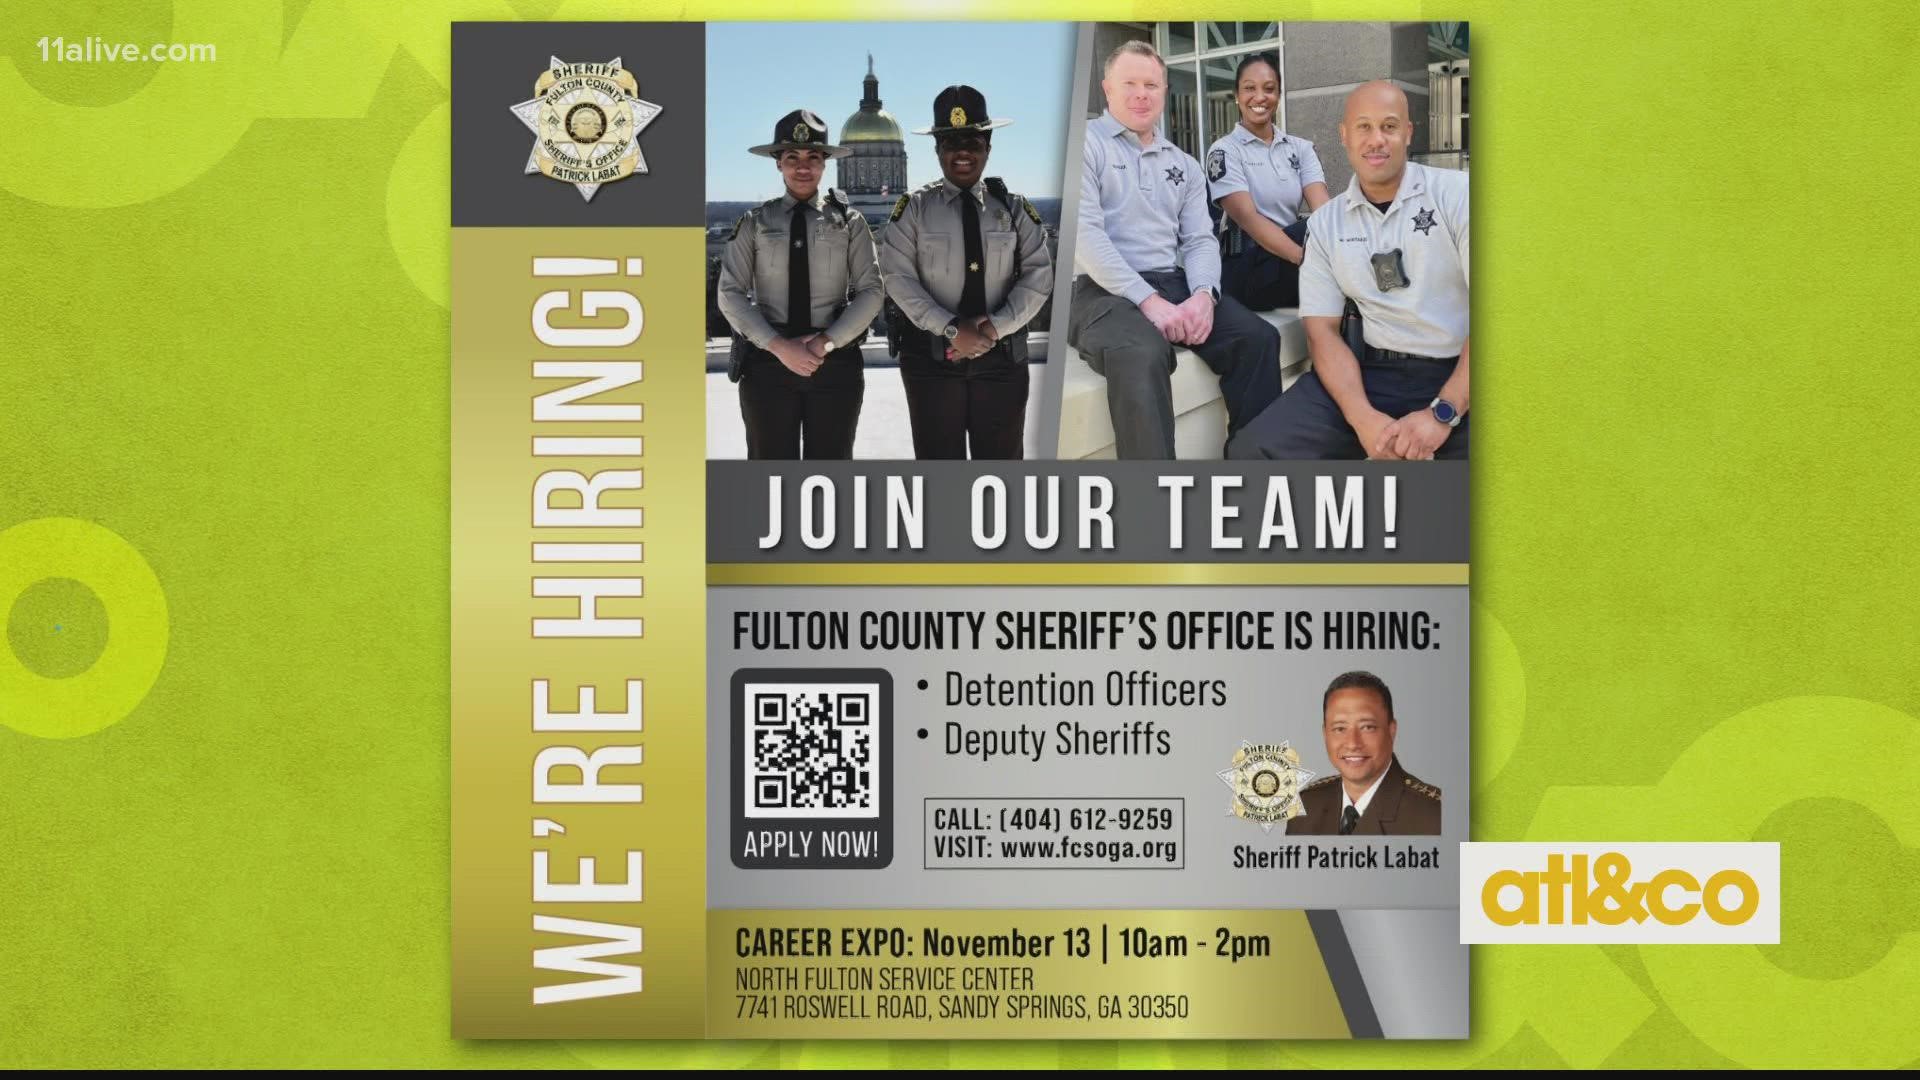 The Fulton County Sheriff's Office is in recruitment mode for temporary and permanent positions. Learn more about hiring from Sheriff Pat Labat.